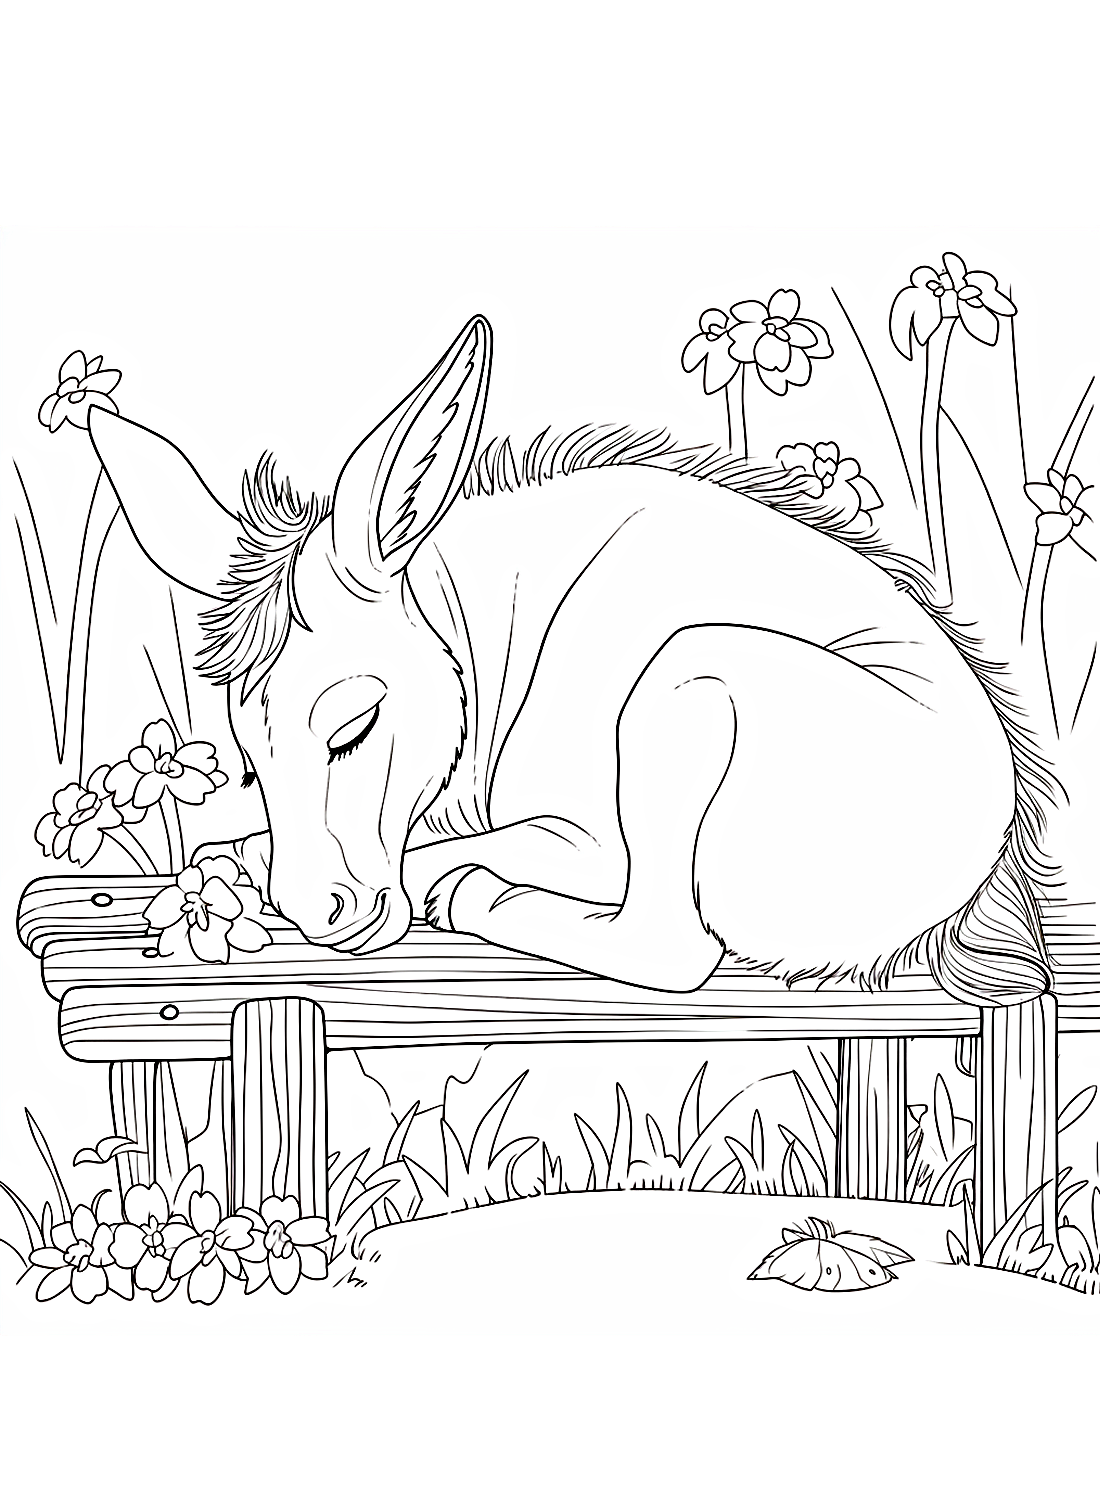 Sleeping Donkey Coloring Pages